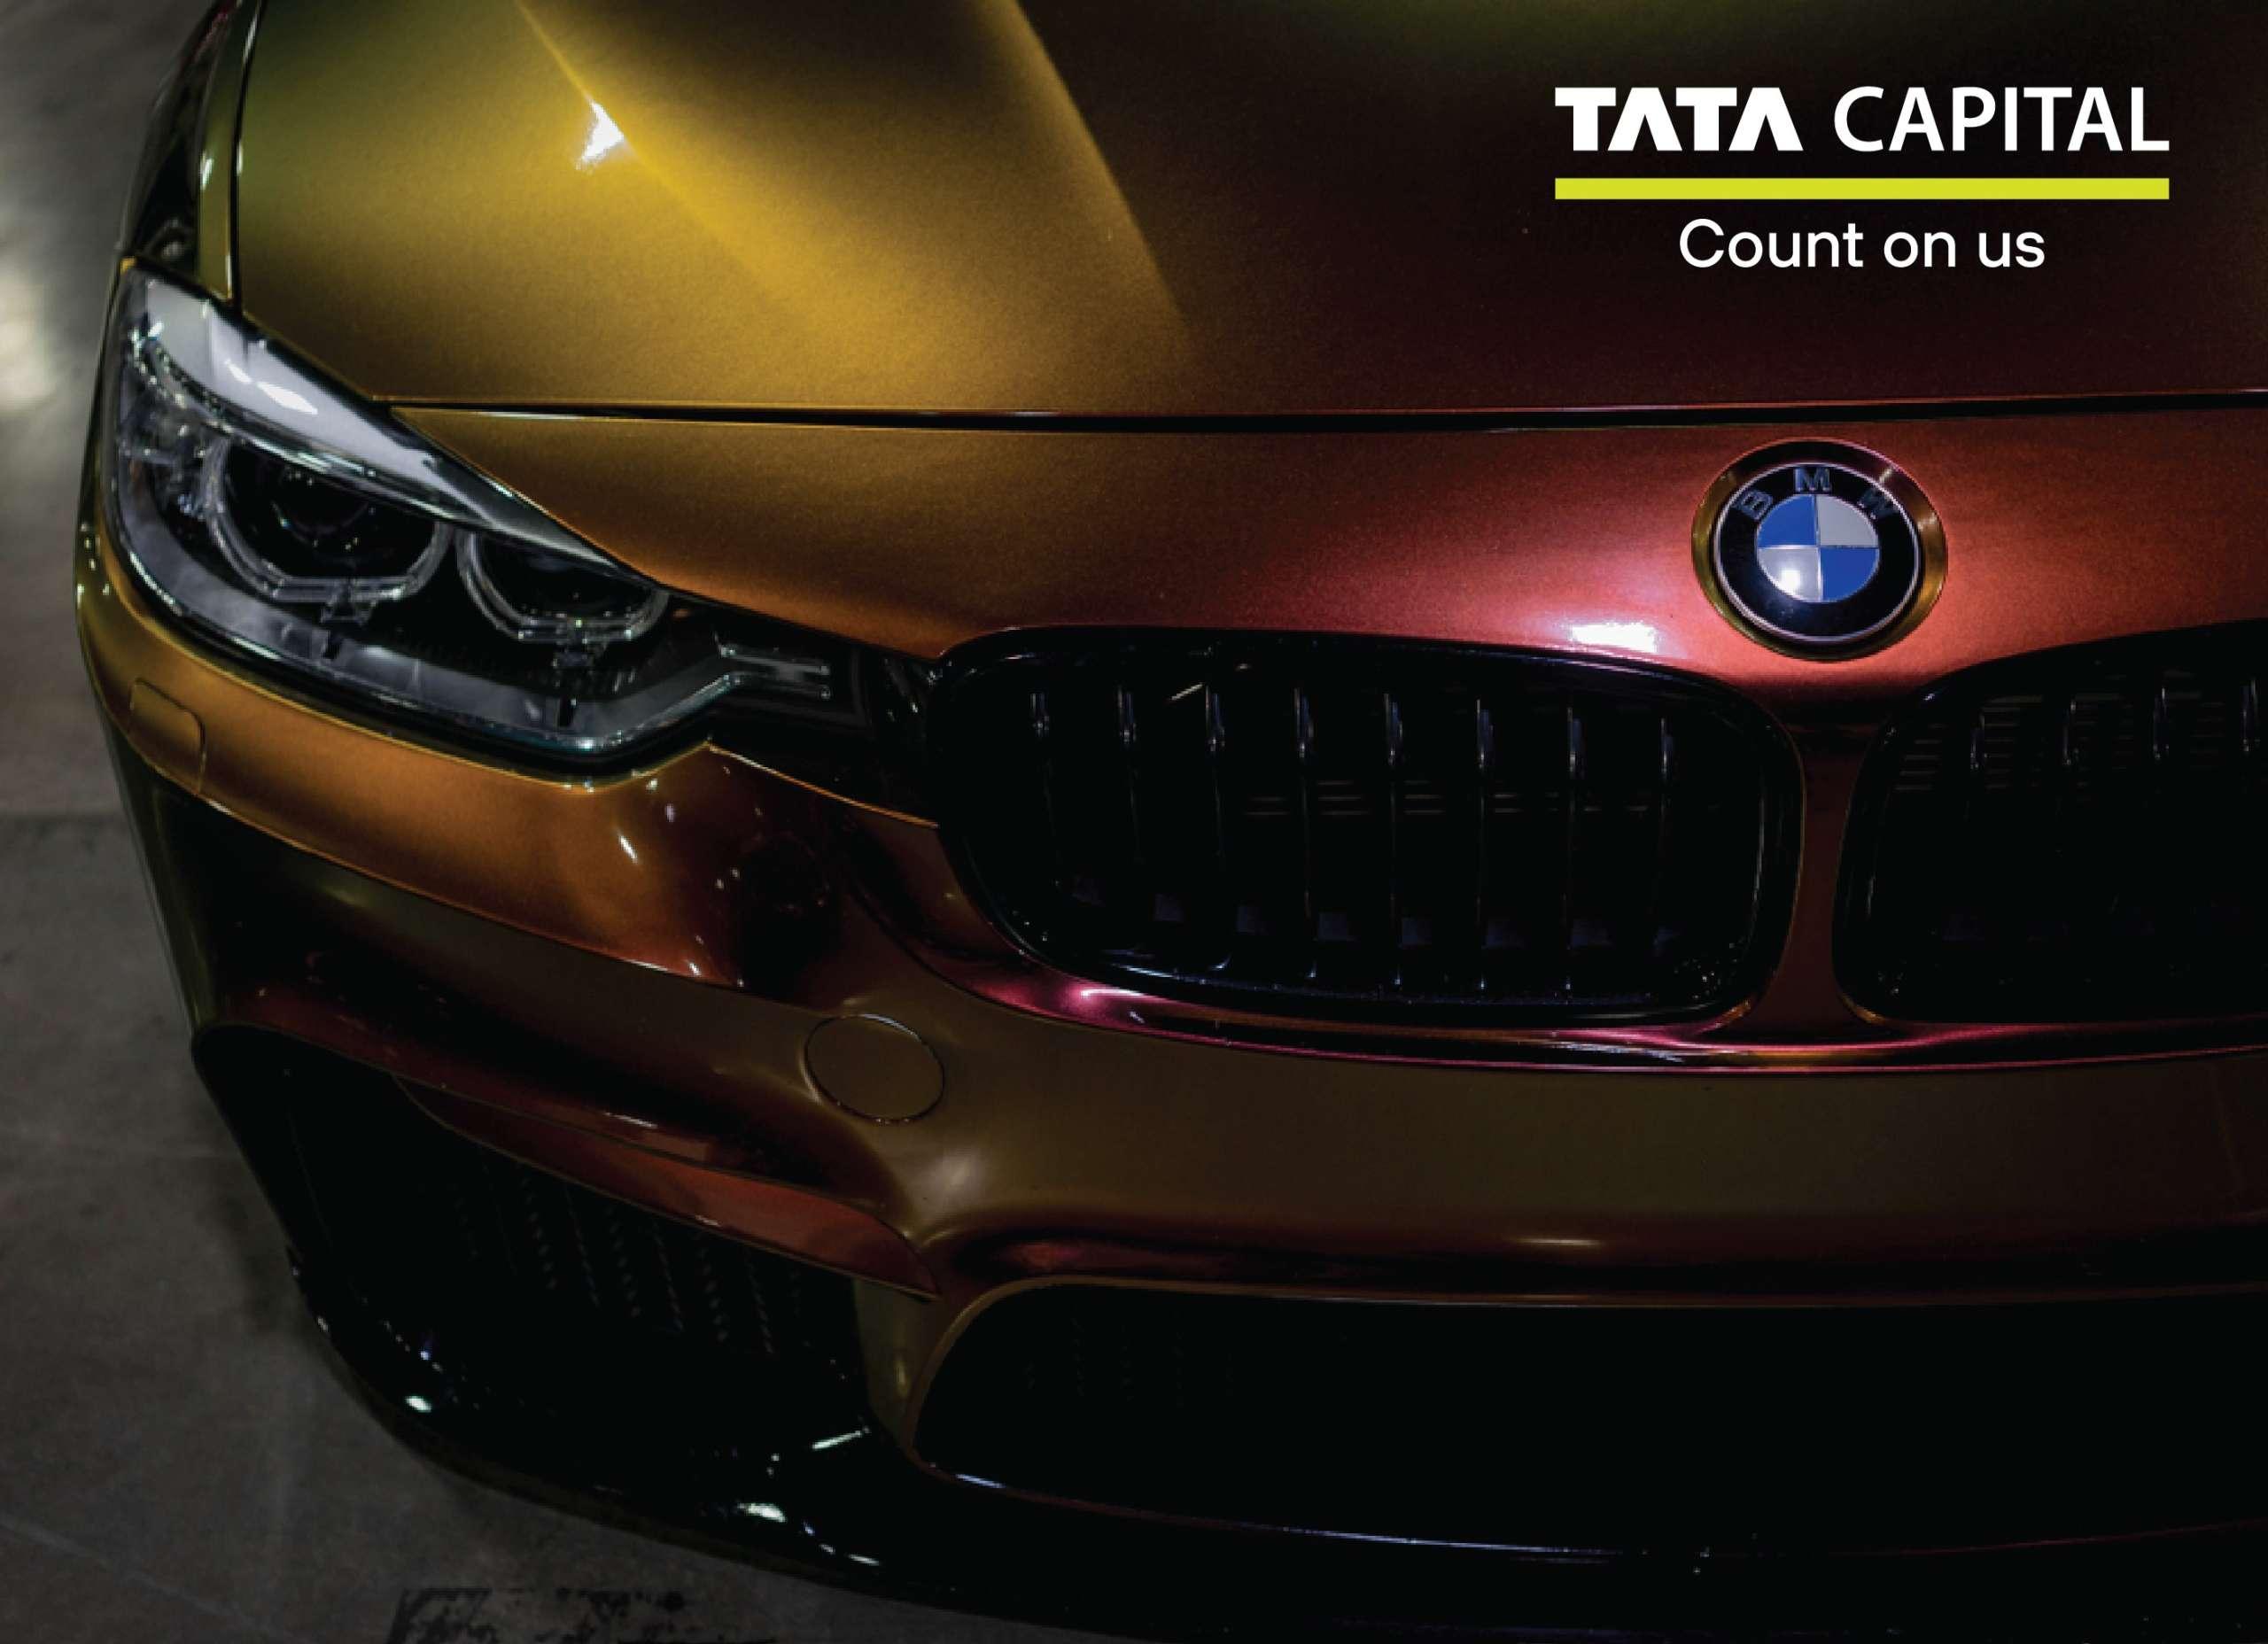 BMW’s Colour-Changing Car: See How BMW Uses Thermochromic Paint in Its Models